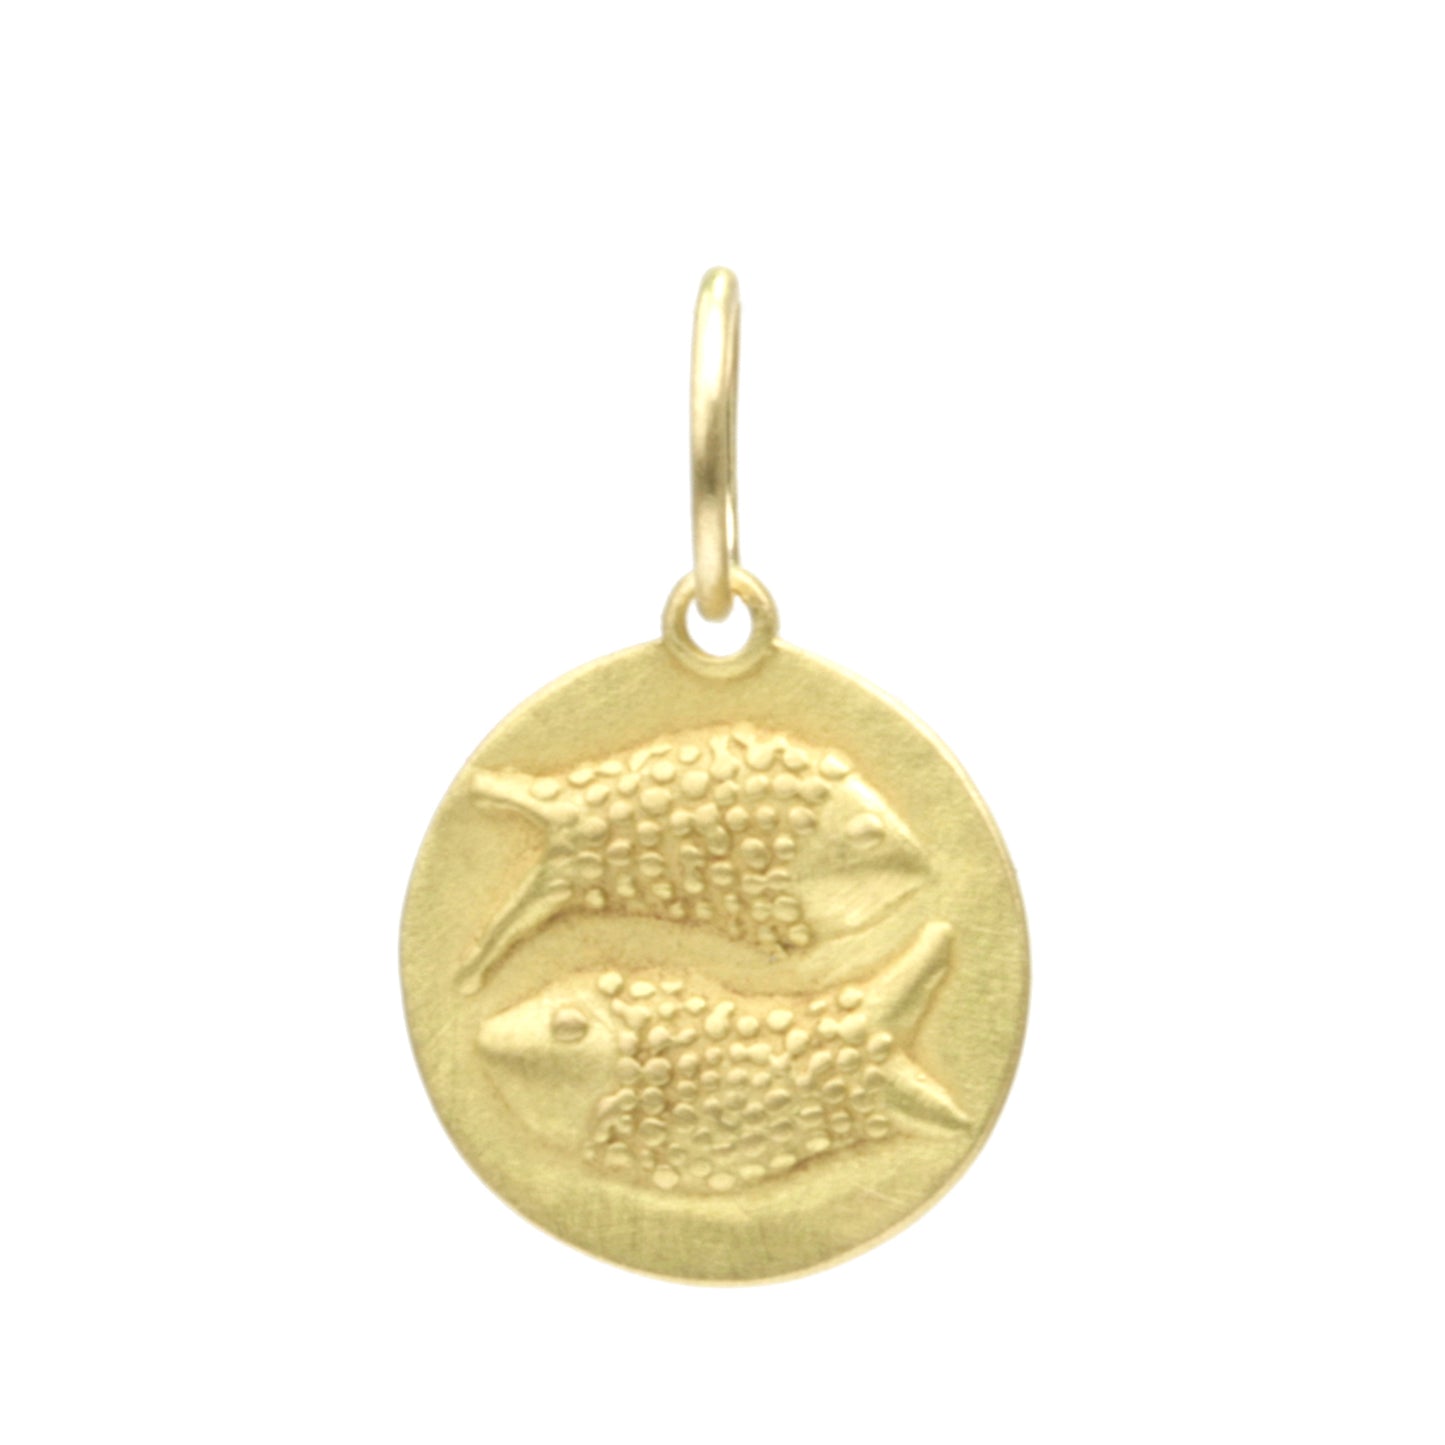 Pisces Medal charm with large bale